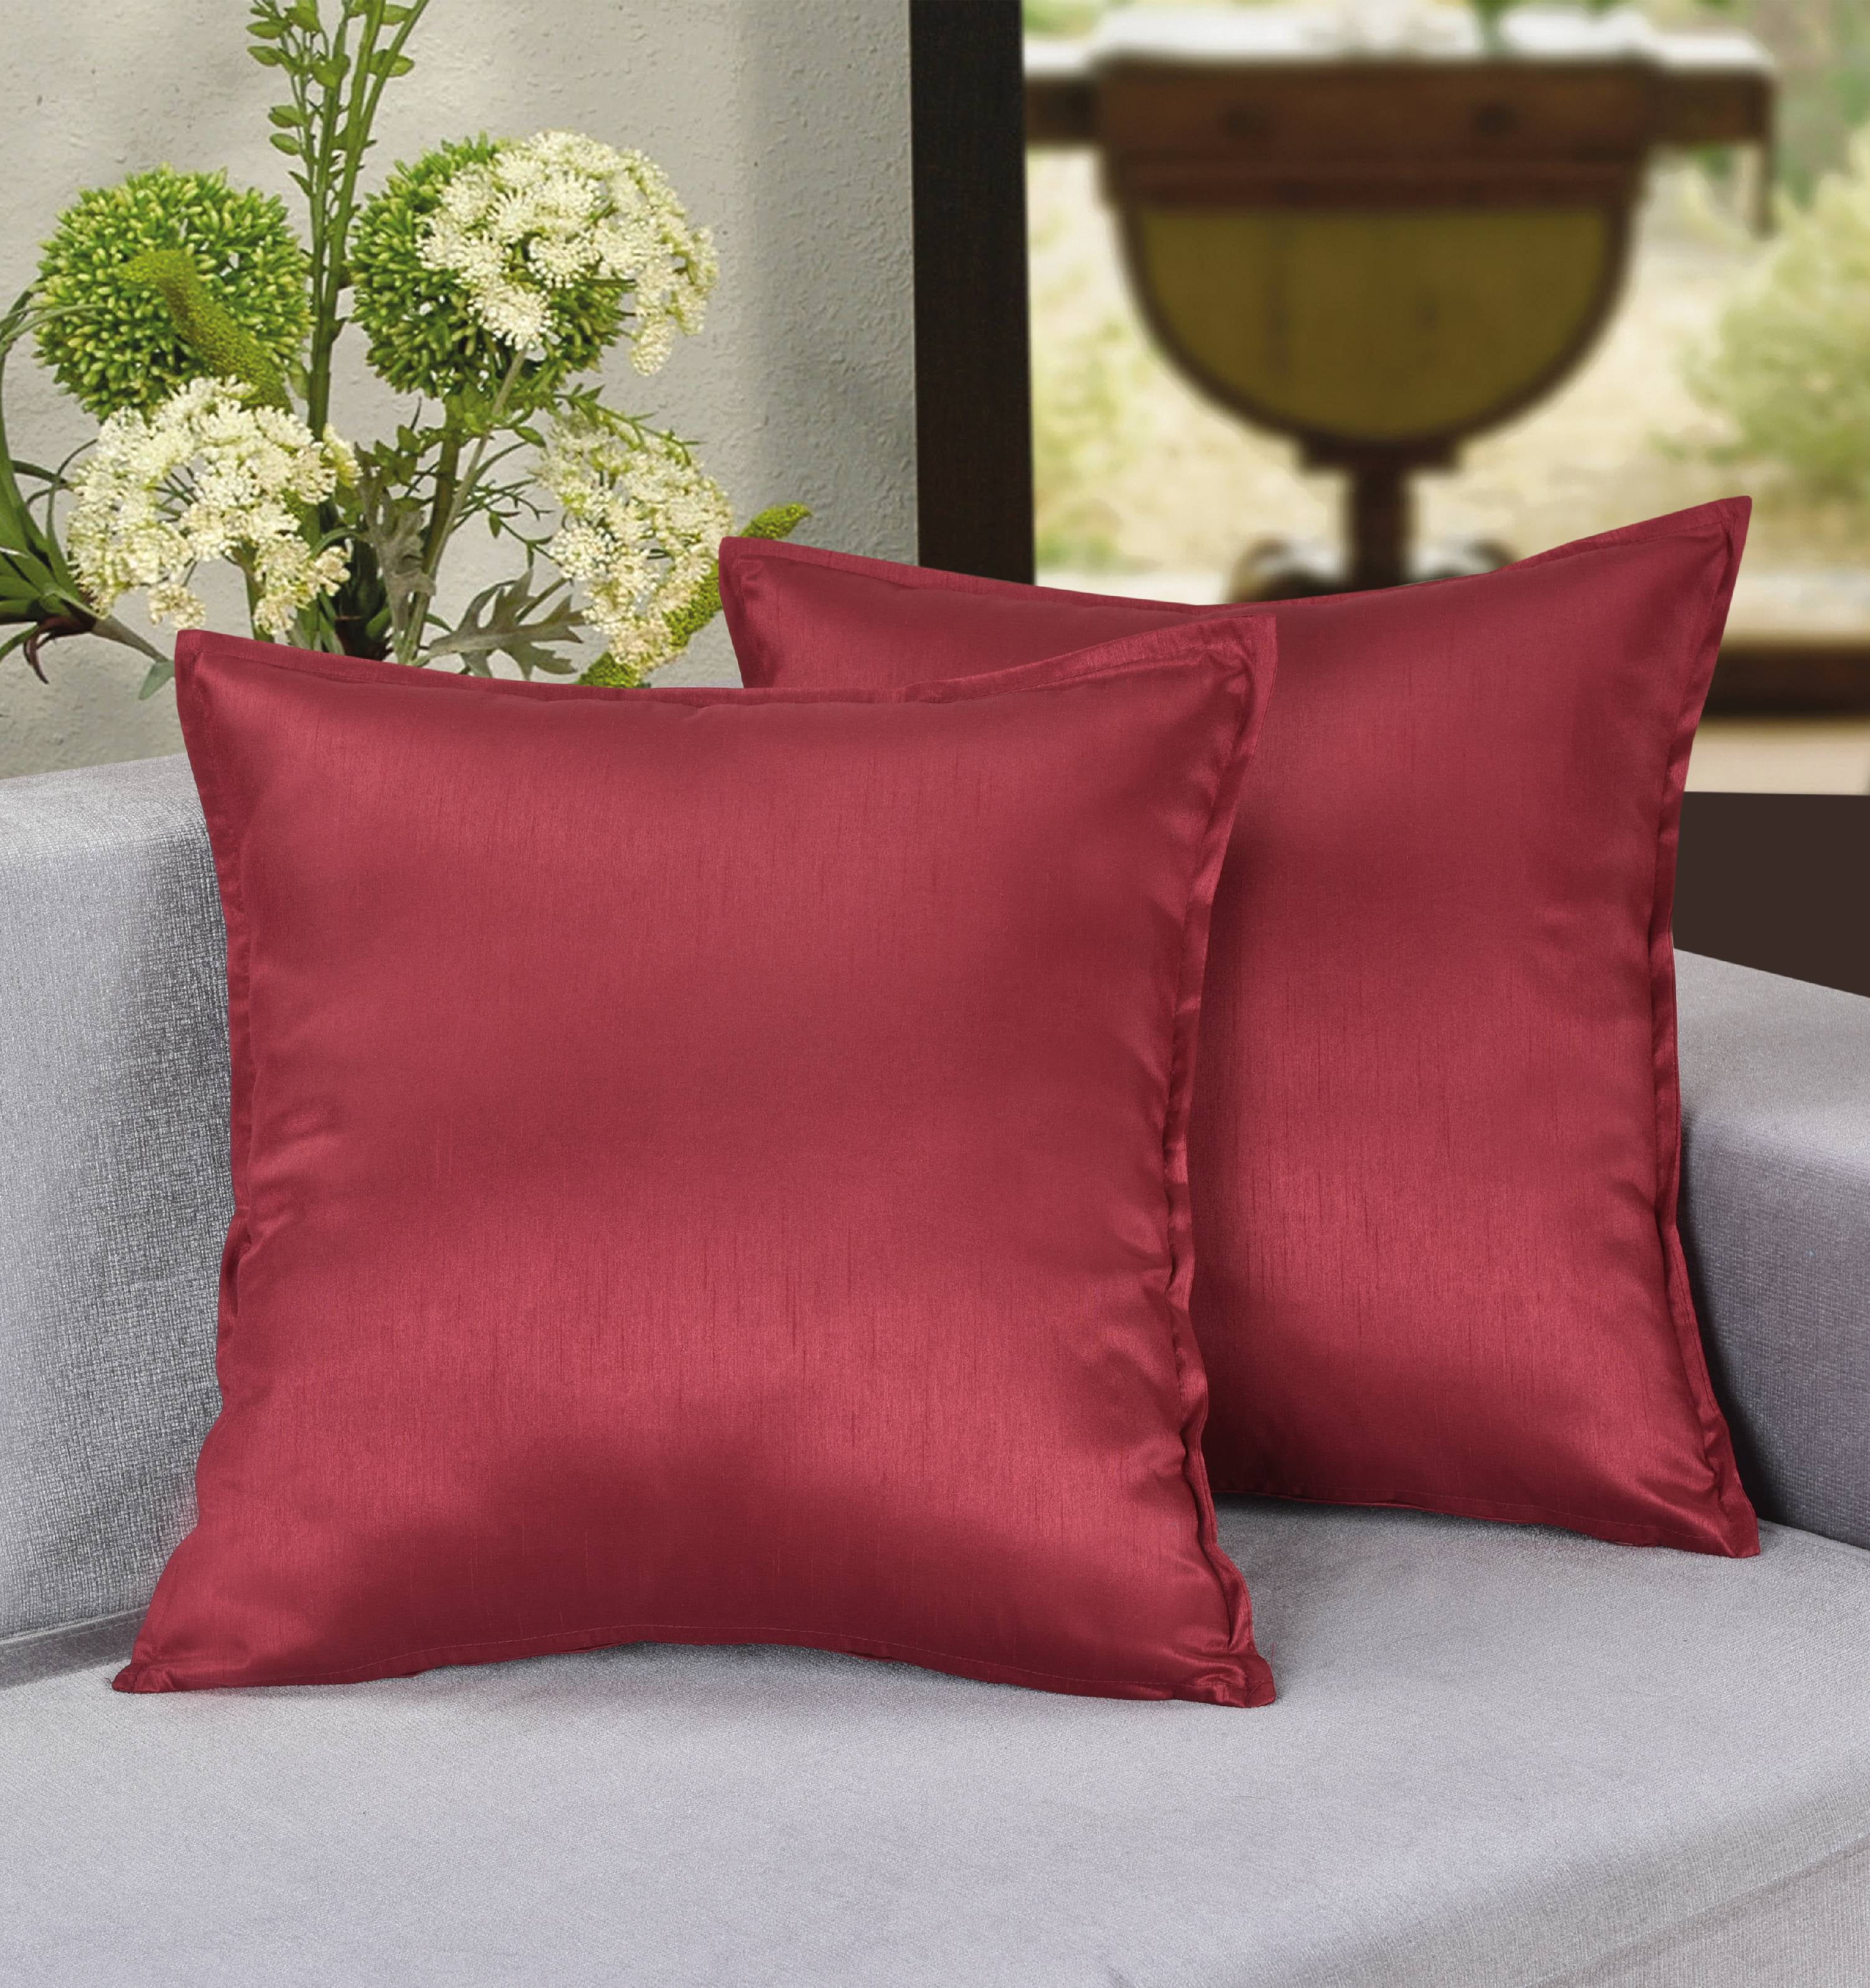 Pack of 2 Solid Burgundy Pillows Cases Cushion Covers Comfy Faux Suede 18 x 18" 